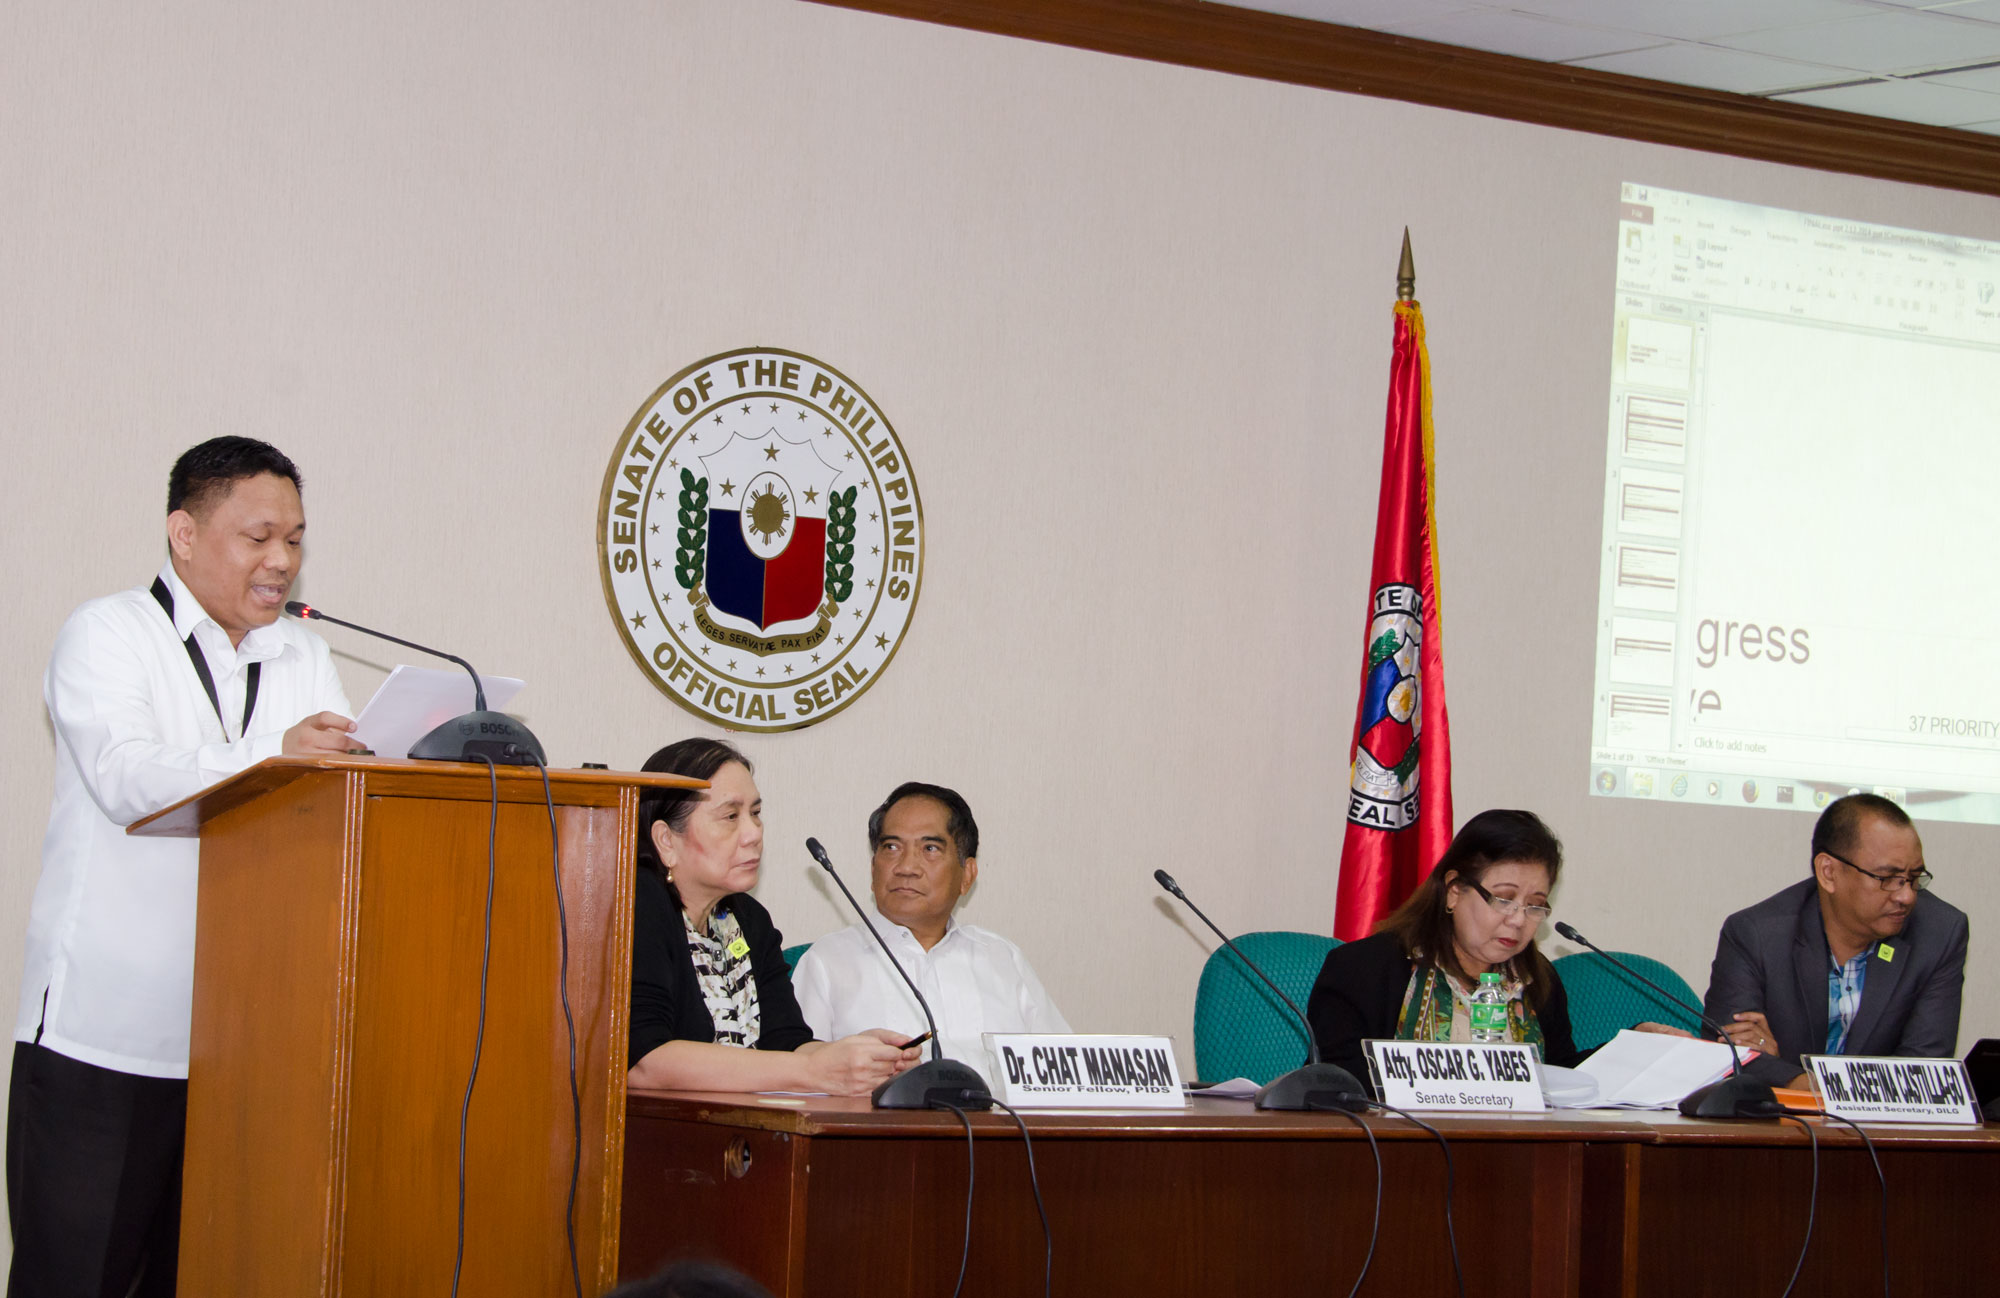 Senate Centennial Lecture Series “Assessment of the Bottom-up Budgeting Process for FY 2015-ggm_7851.jpg